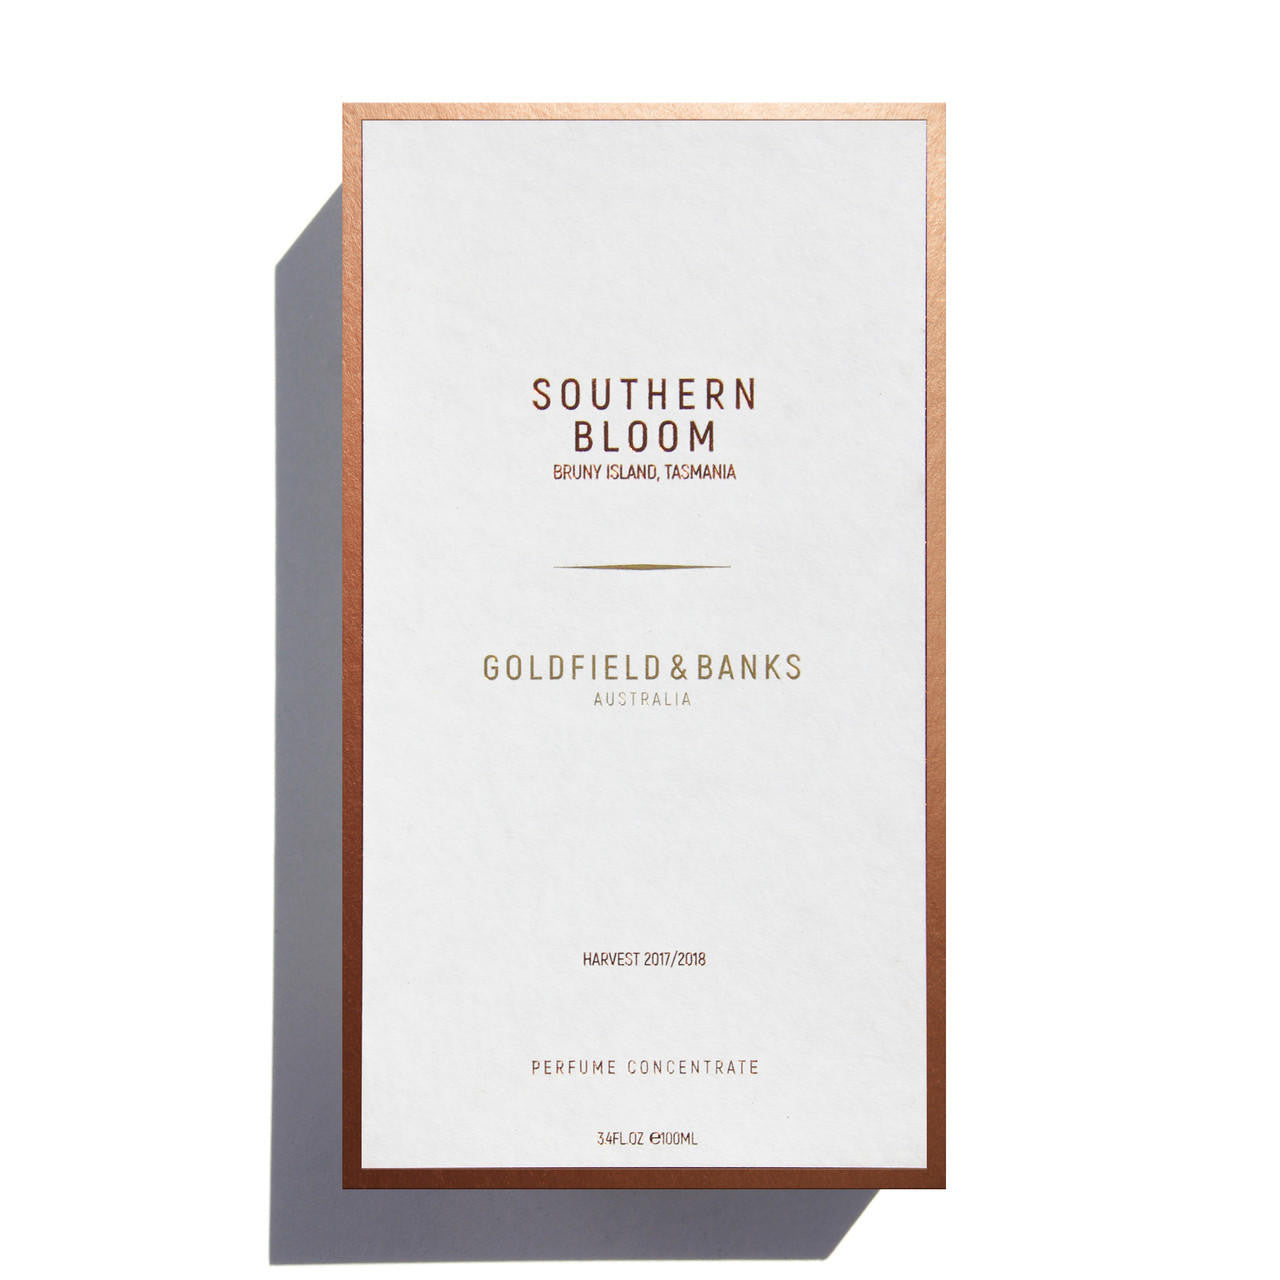  Goldfield & Banks Australia SOUTHERN BLOOM Perfume Concentrate 